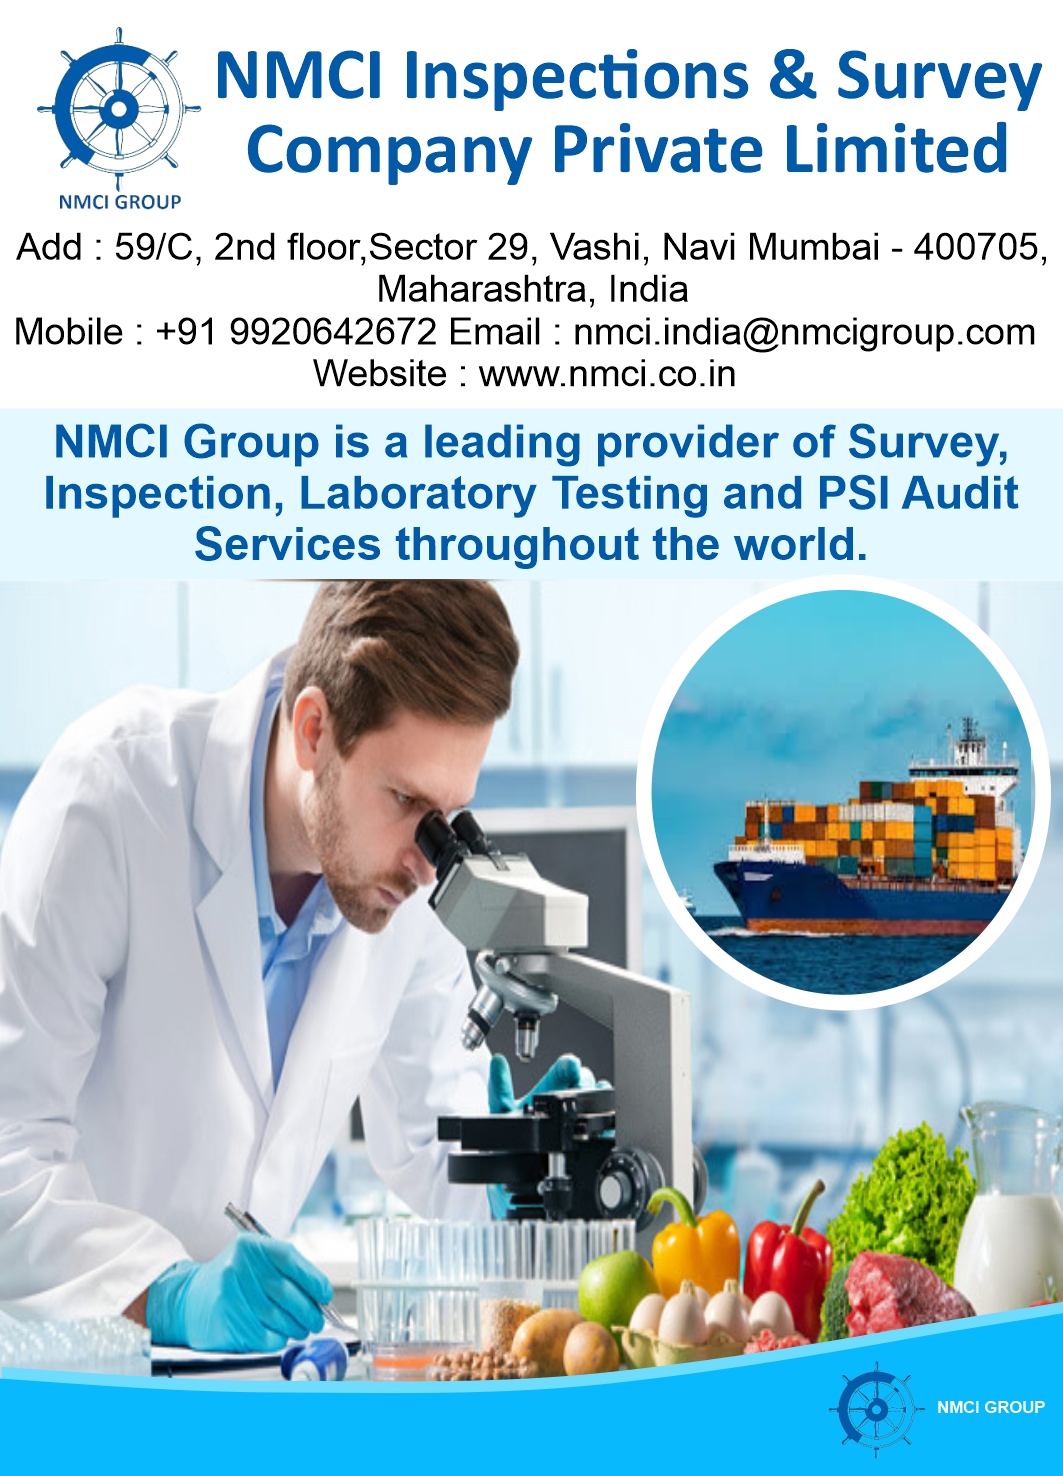 NMCI Inpections & Survey Company Private Limited